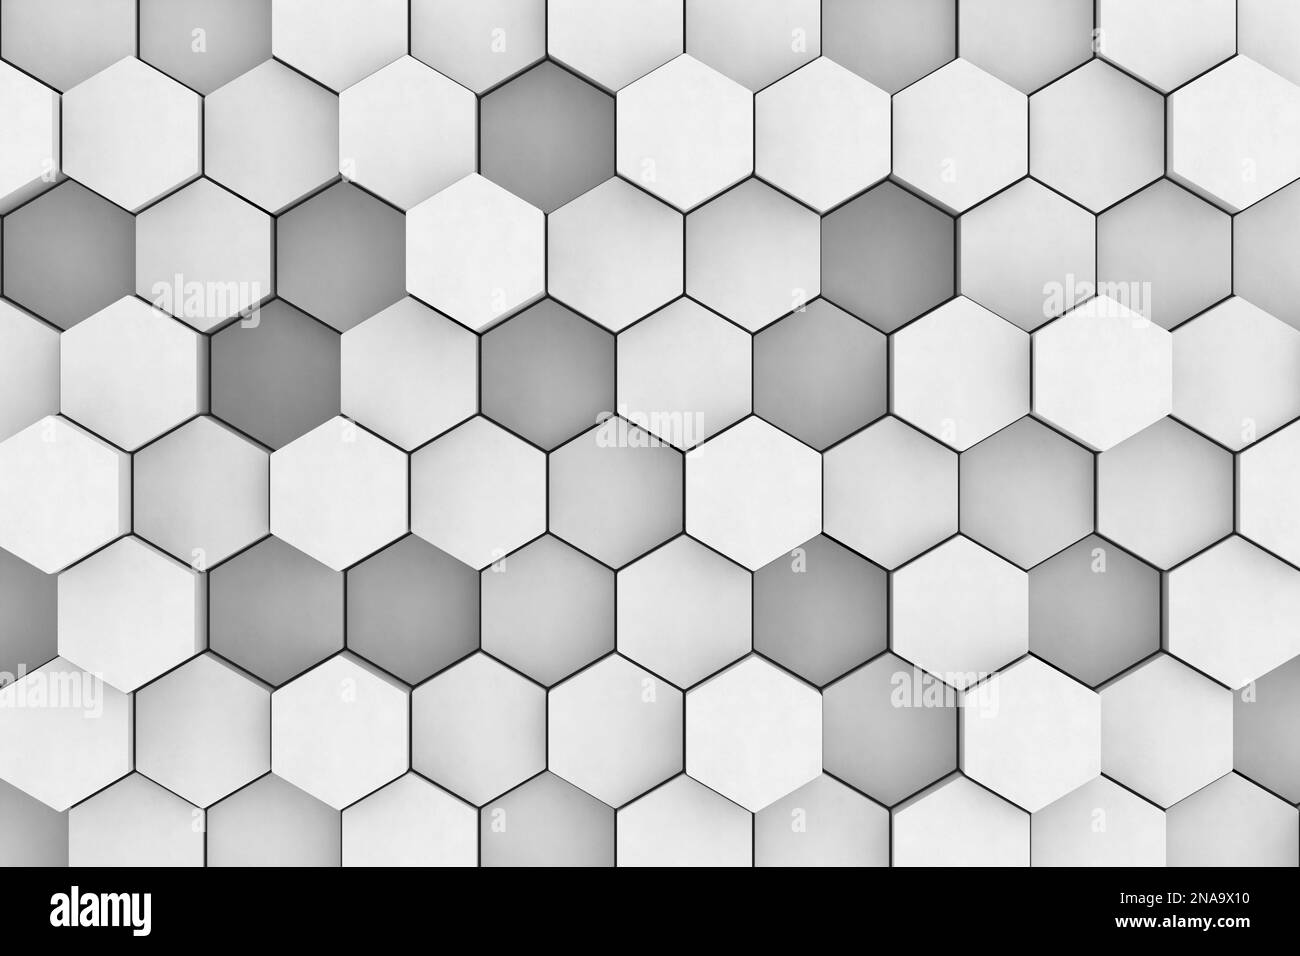 hexagonal cellular structure. Wall texture with 3D hexagon tile pattern. 3D illustration Stock Photo